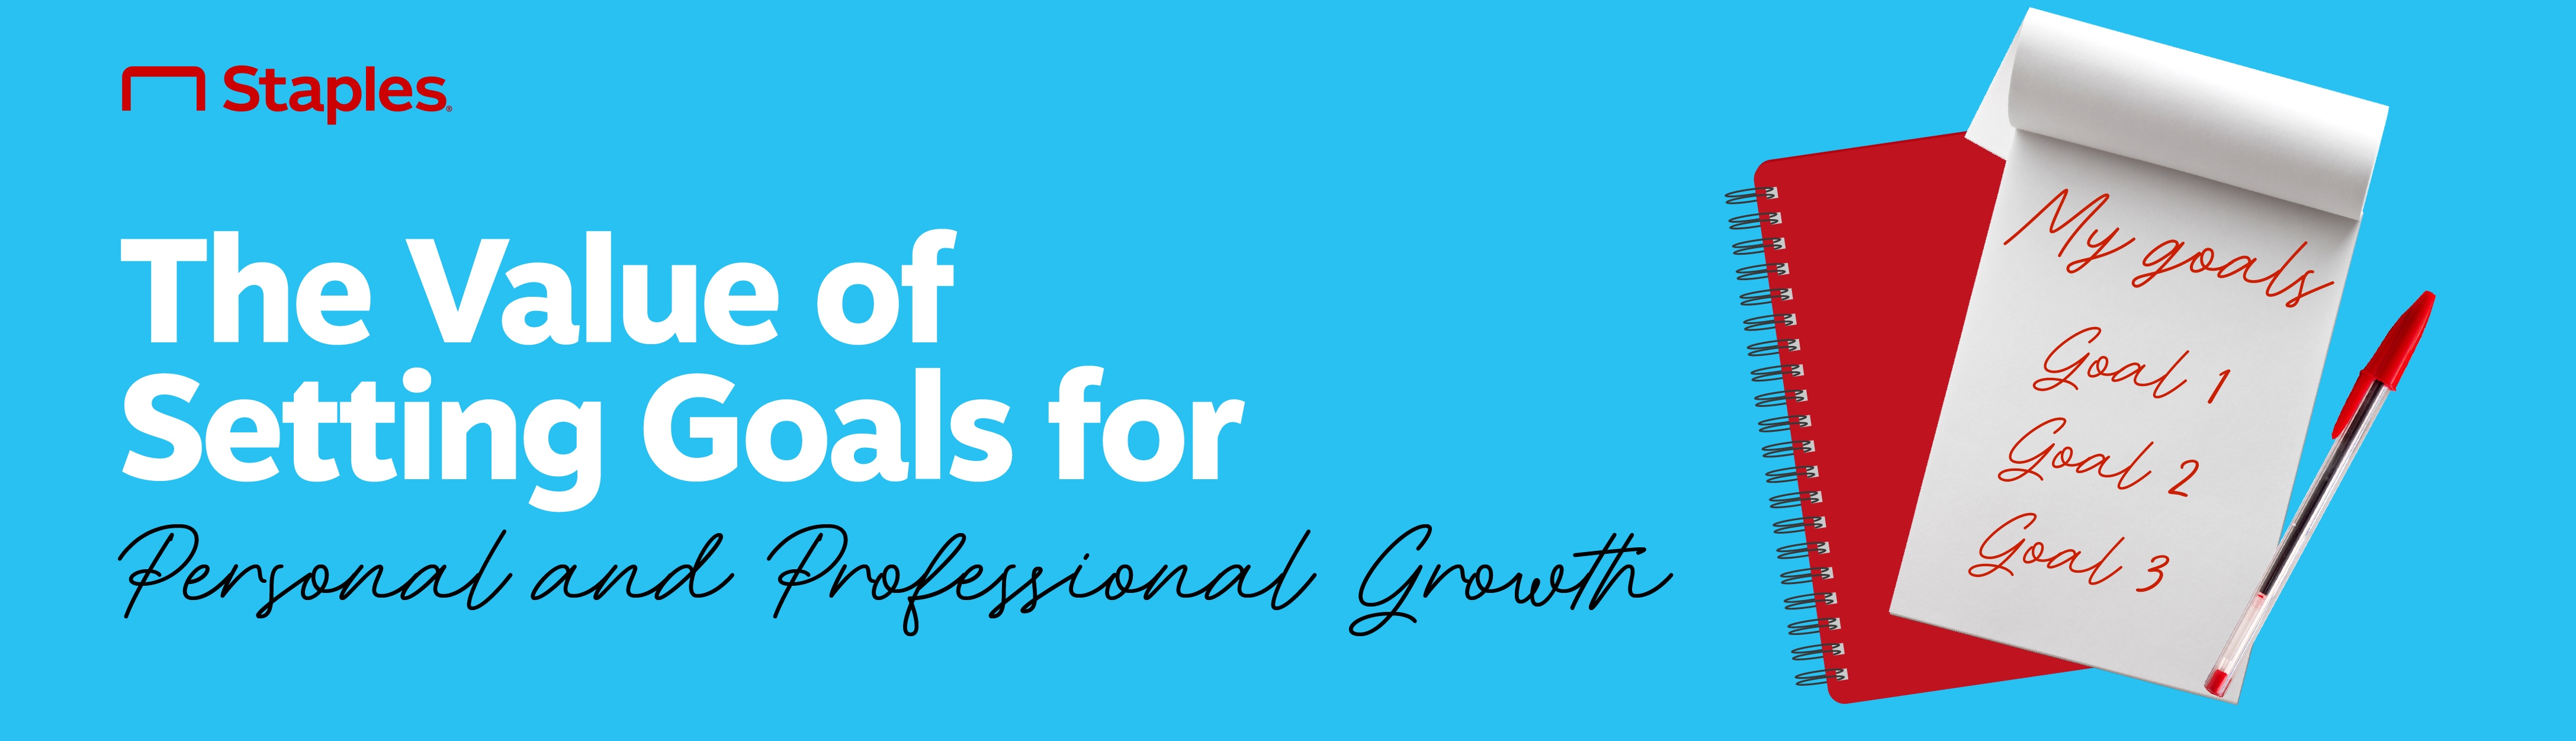 Thumbnail Which Reads: "The Value of Setting Goals for Personal and Professional Growth."